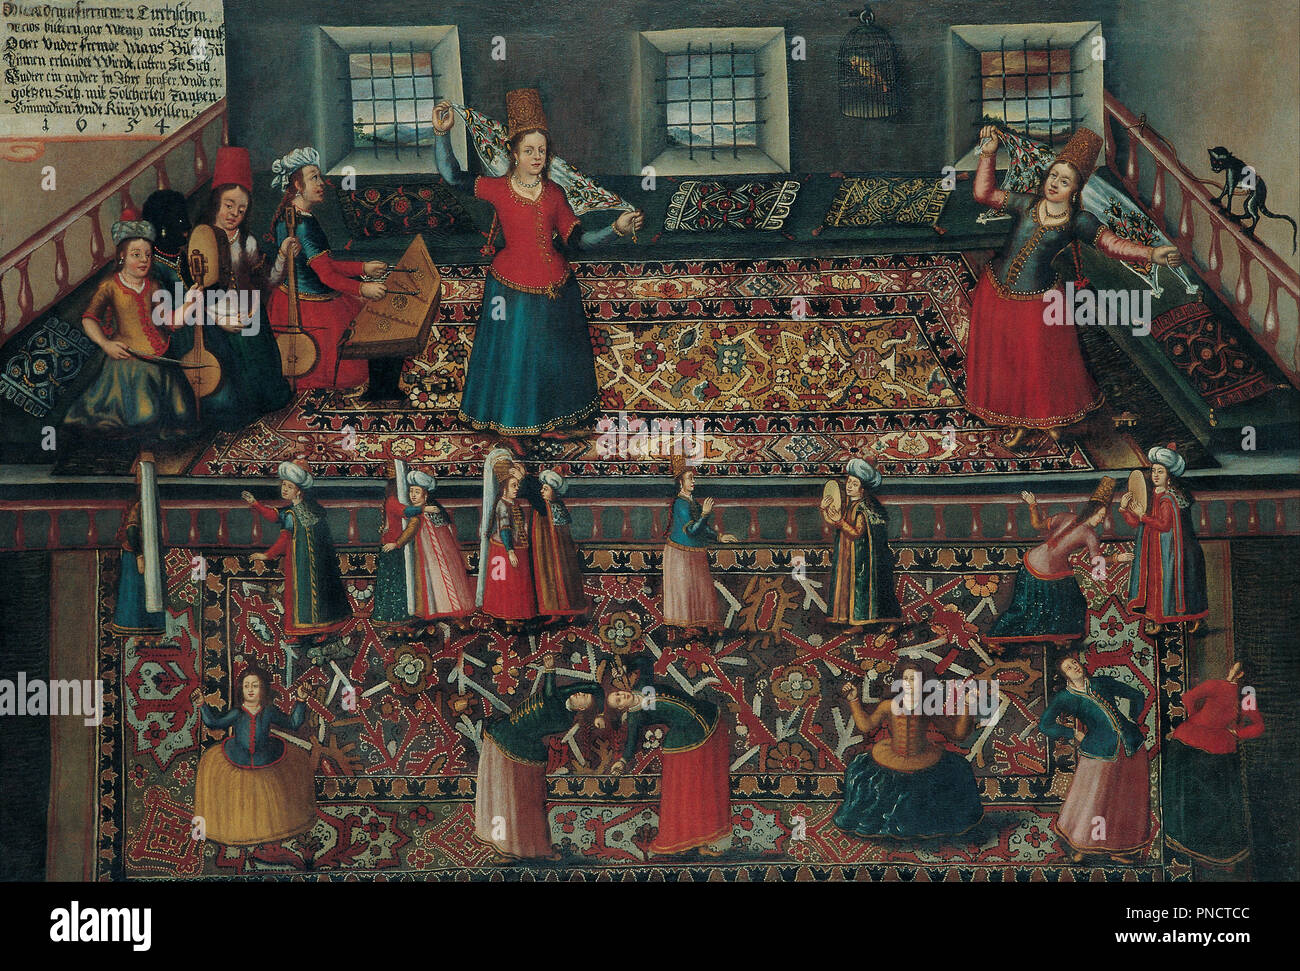 A Scene from the Turkish Harem. Date/Period: Second half of 17th century. Painting. Oil on canvas. Height: 1,300 mm (51.18 in); Width: 1,935 mm (76.18 in). Author: Franz Hermann, Hans Gemminger, Valentin Mueller. Hörmann, Franz Georg. Stock Photo